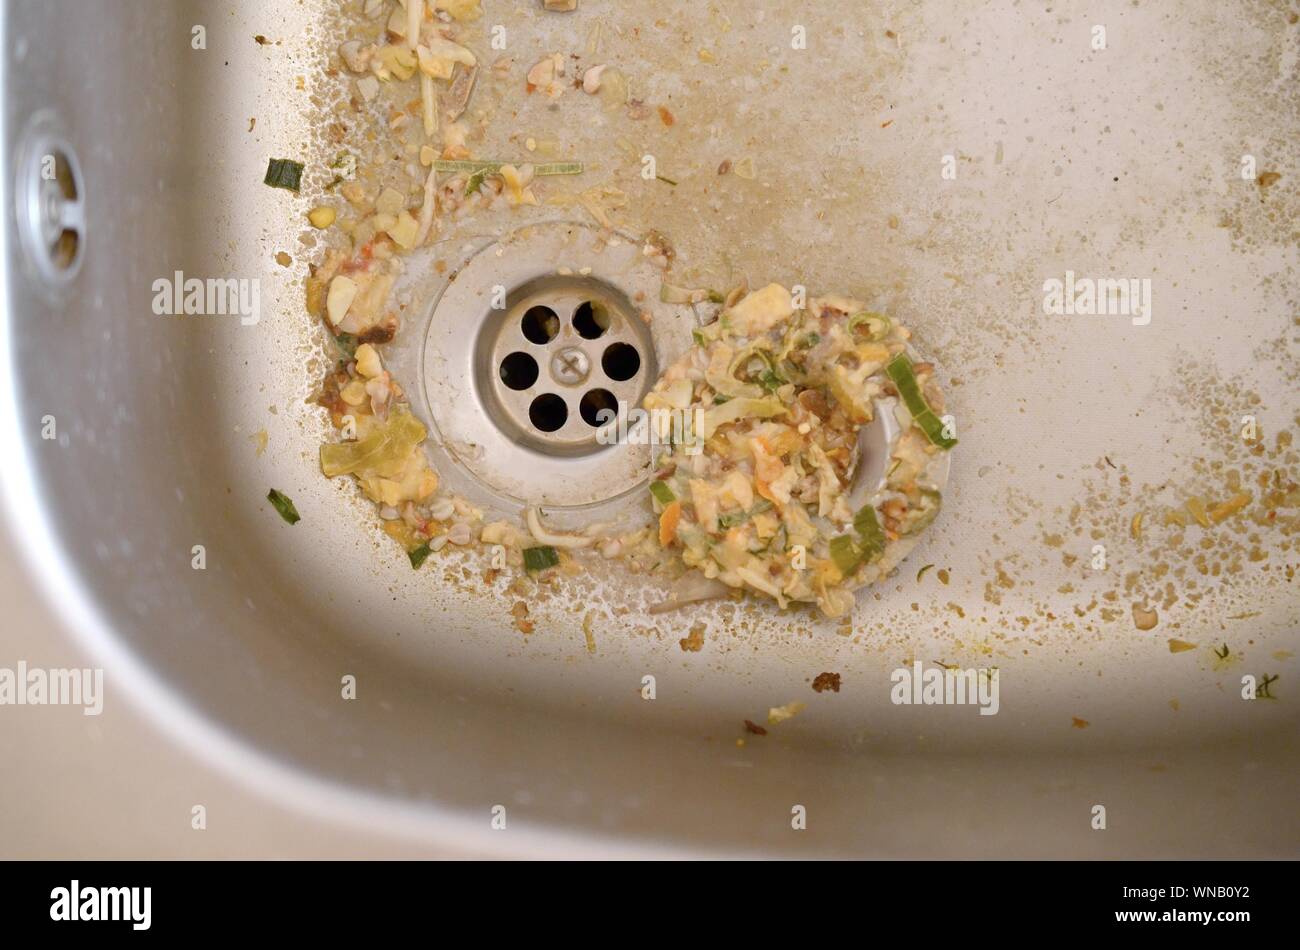 Close Up On Dirty Clogging Kitchen Sink Drain Blur And Selective Focus Of Sink Hole Clogging Up With Food Particles Stock Photo Alamy